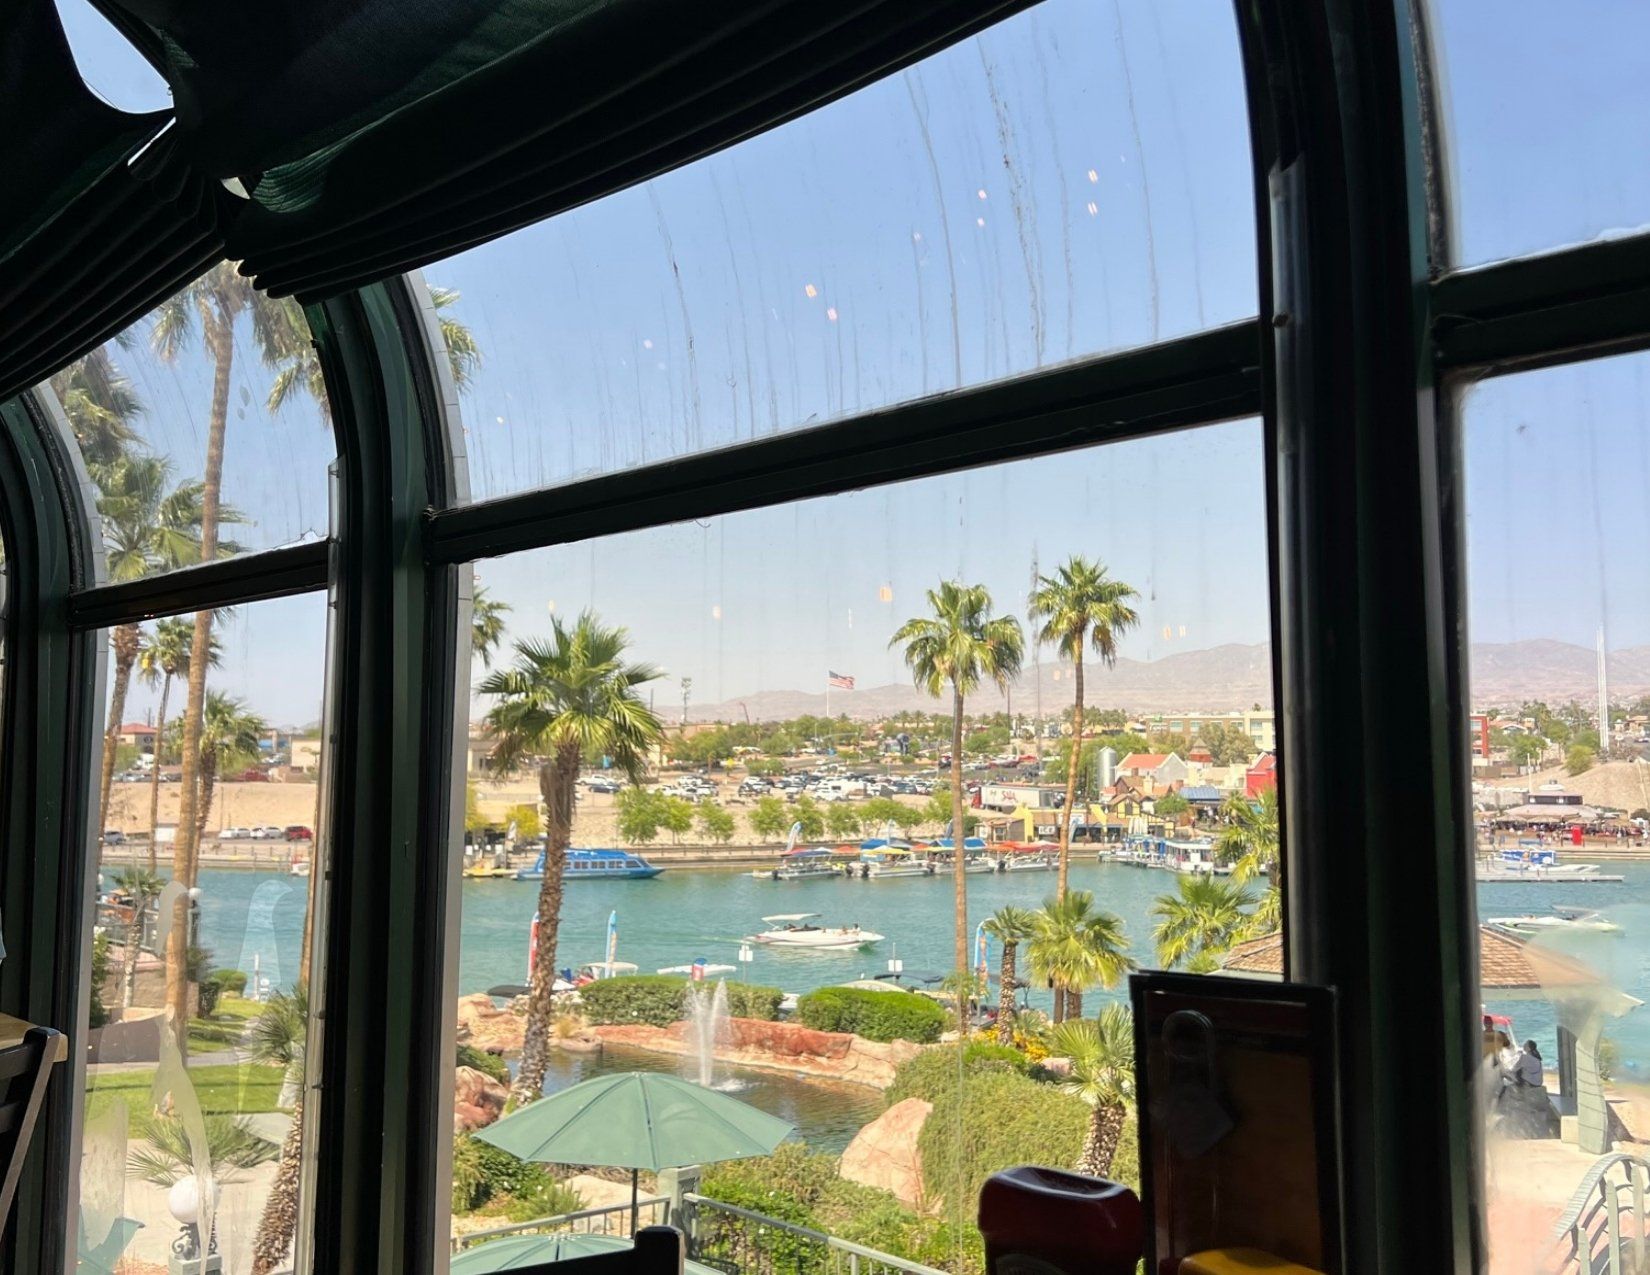 view of Lake Havasu from a brewery, blue water, palm trees, marina, beachy feel